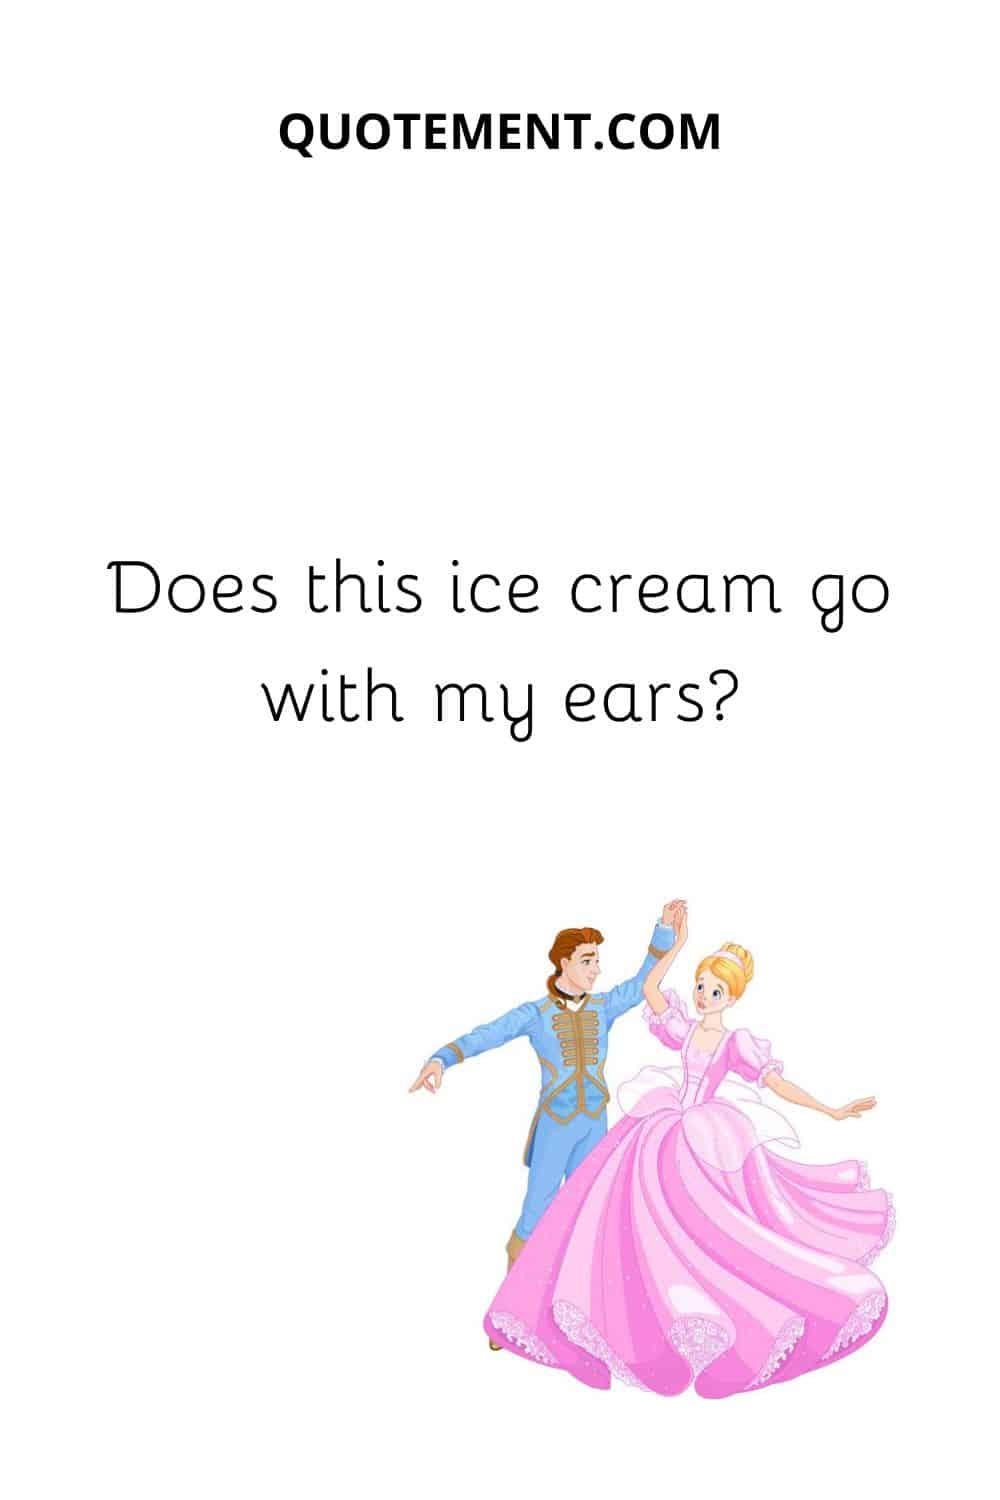 Does this ice cream go with my ears?